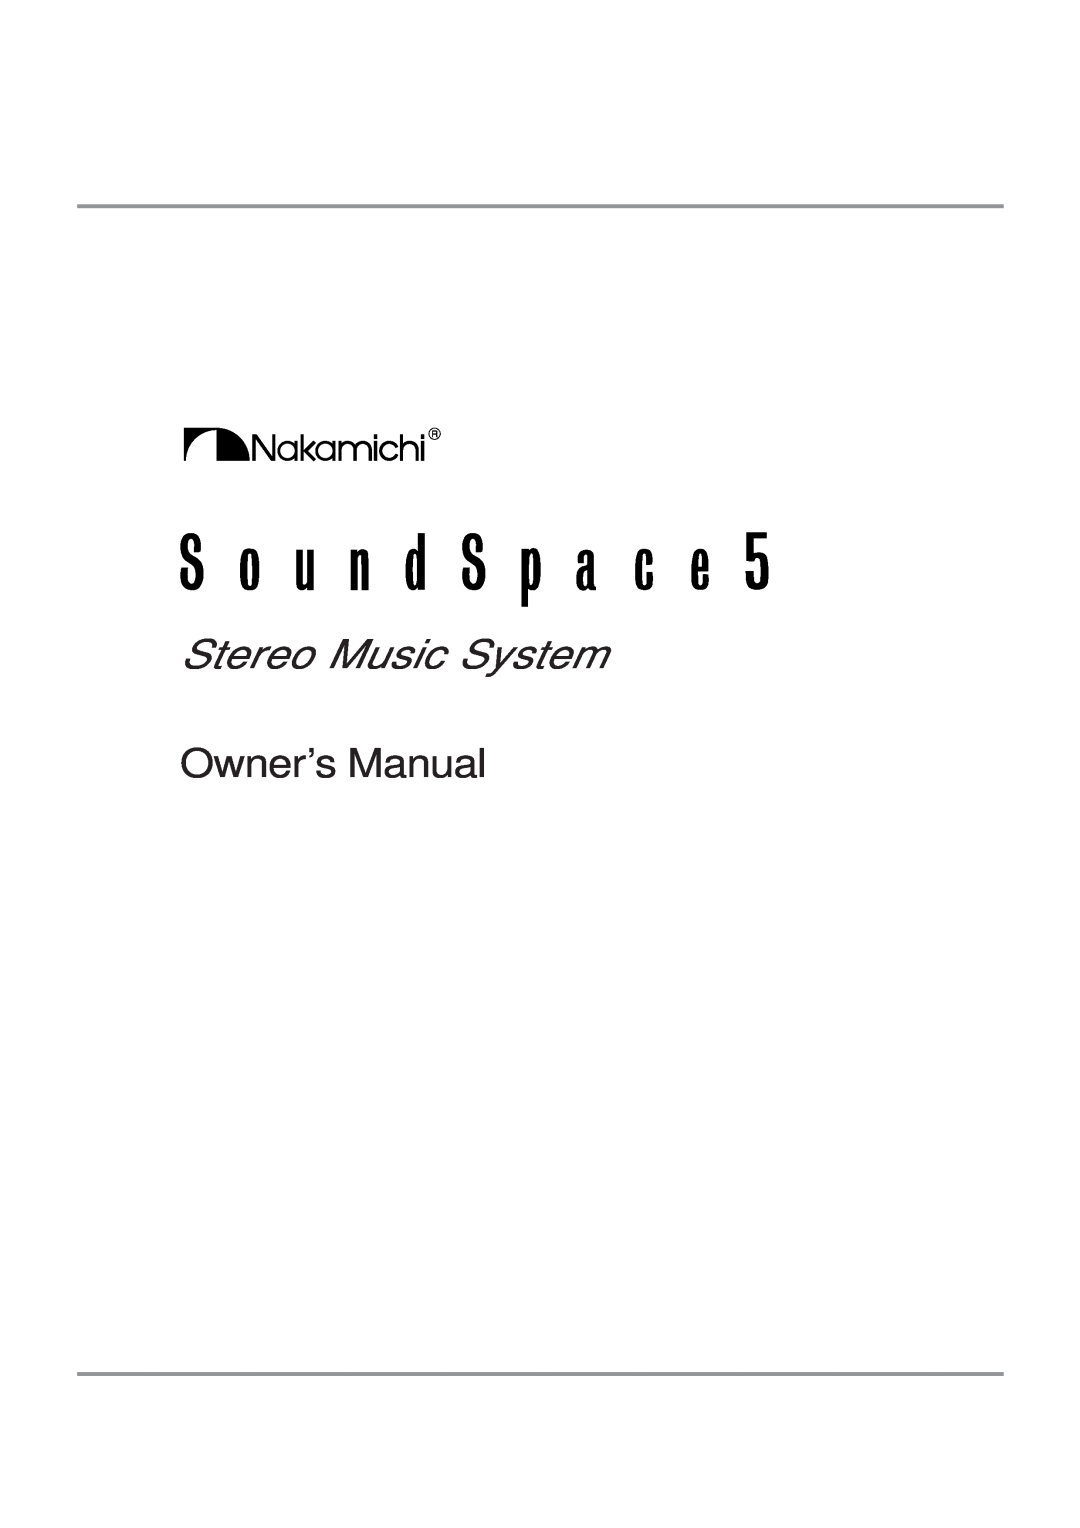 Nakamichi SoundSpace 5 owner manual Stereo Music System 